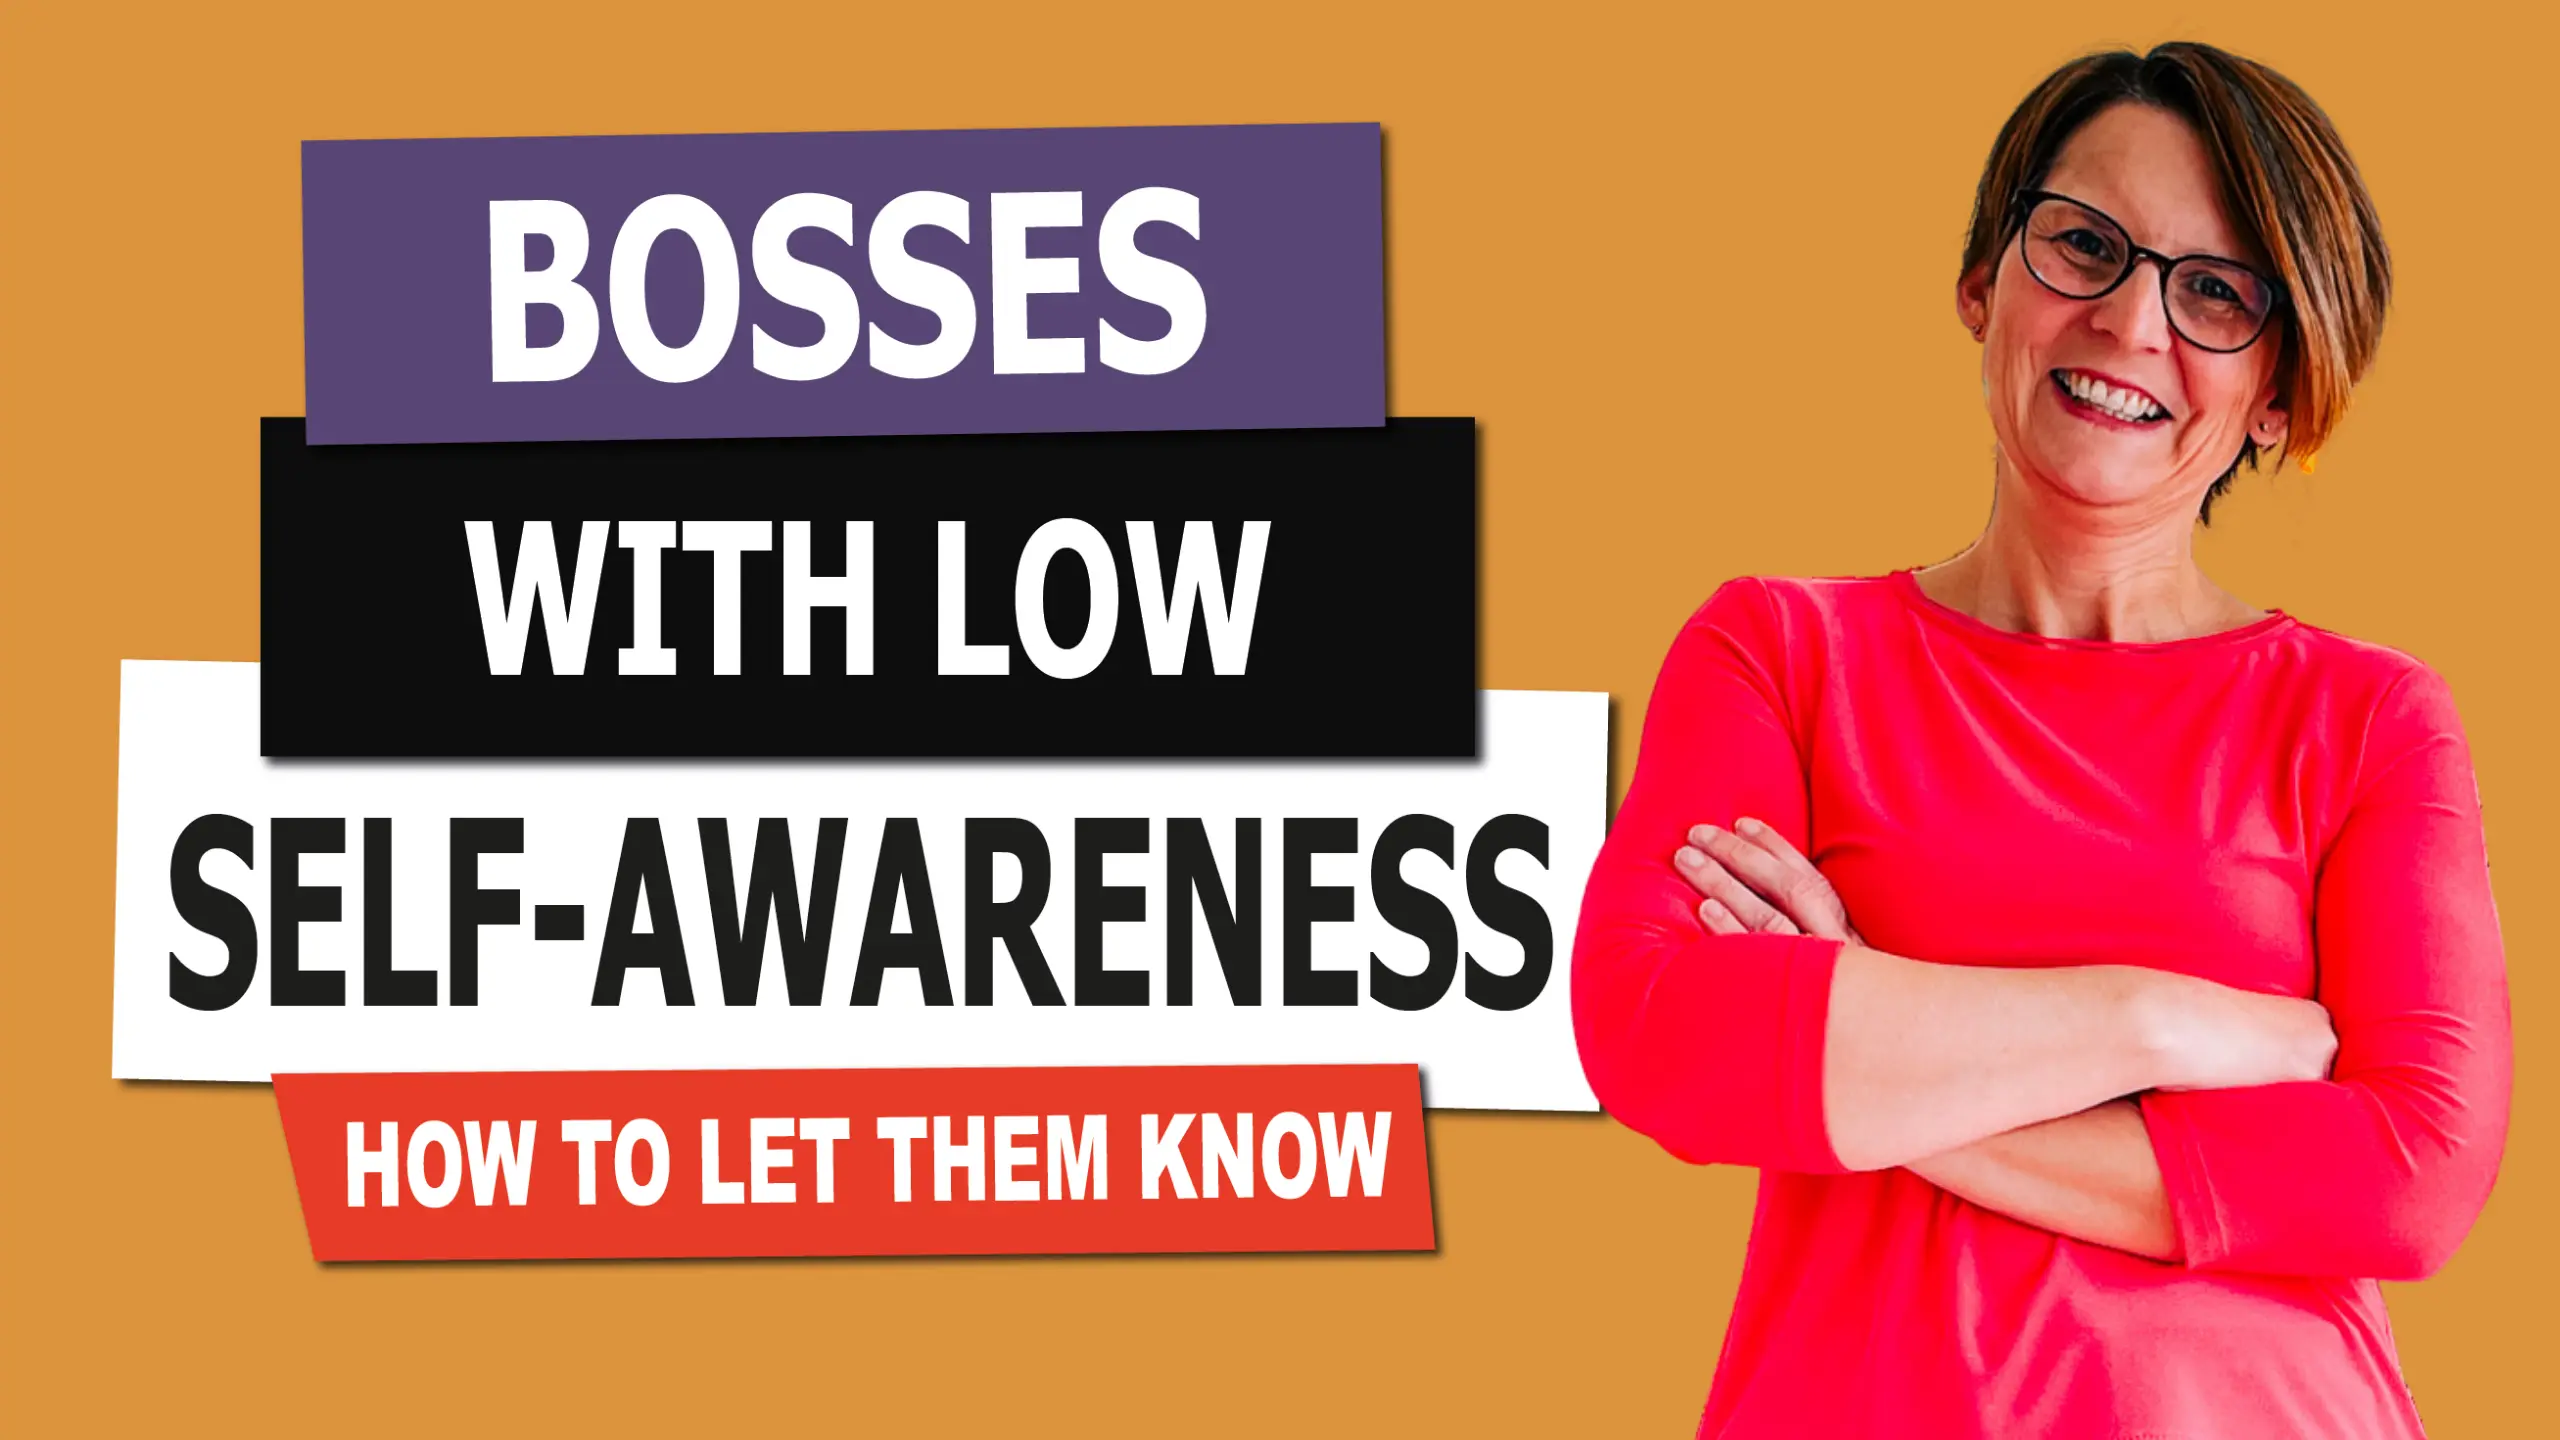 Bosses with Low Self-Awareness with Liane Davey